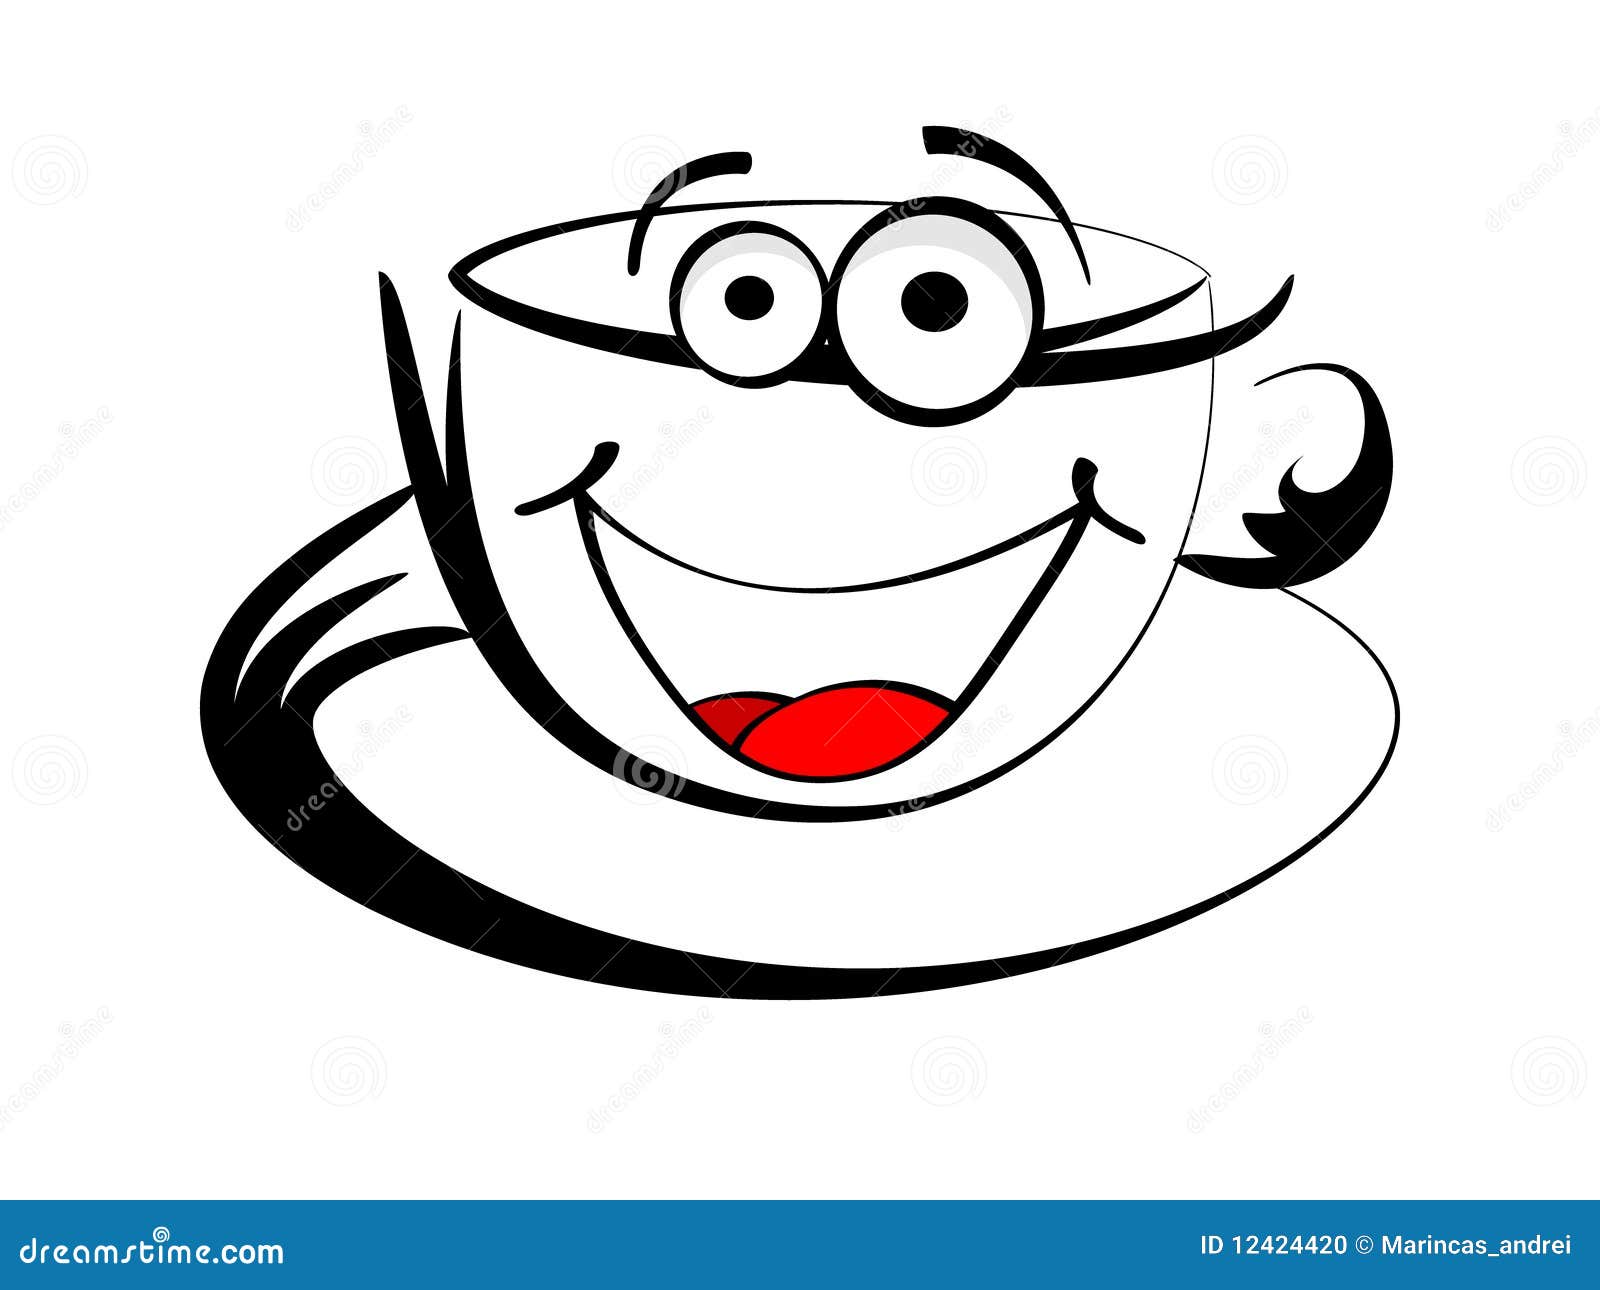 Happy Coffee Cup Stock Photo - Image: 12424420